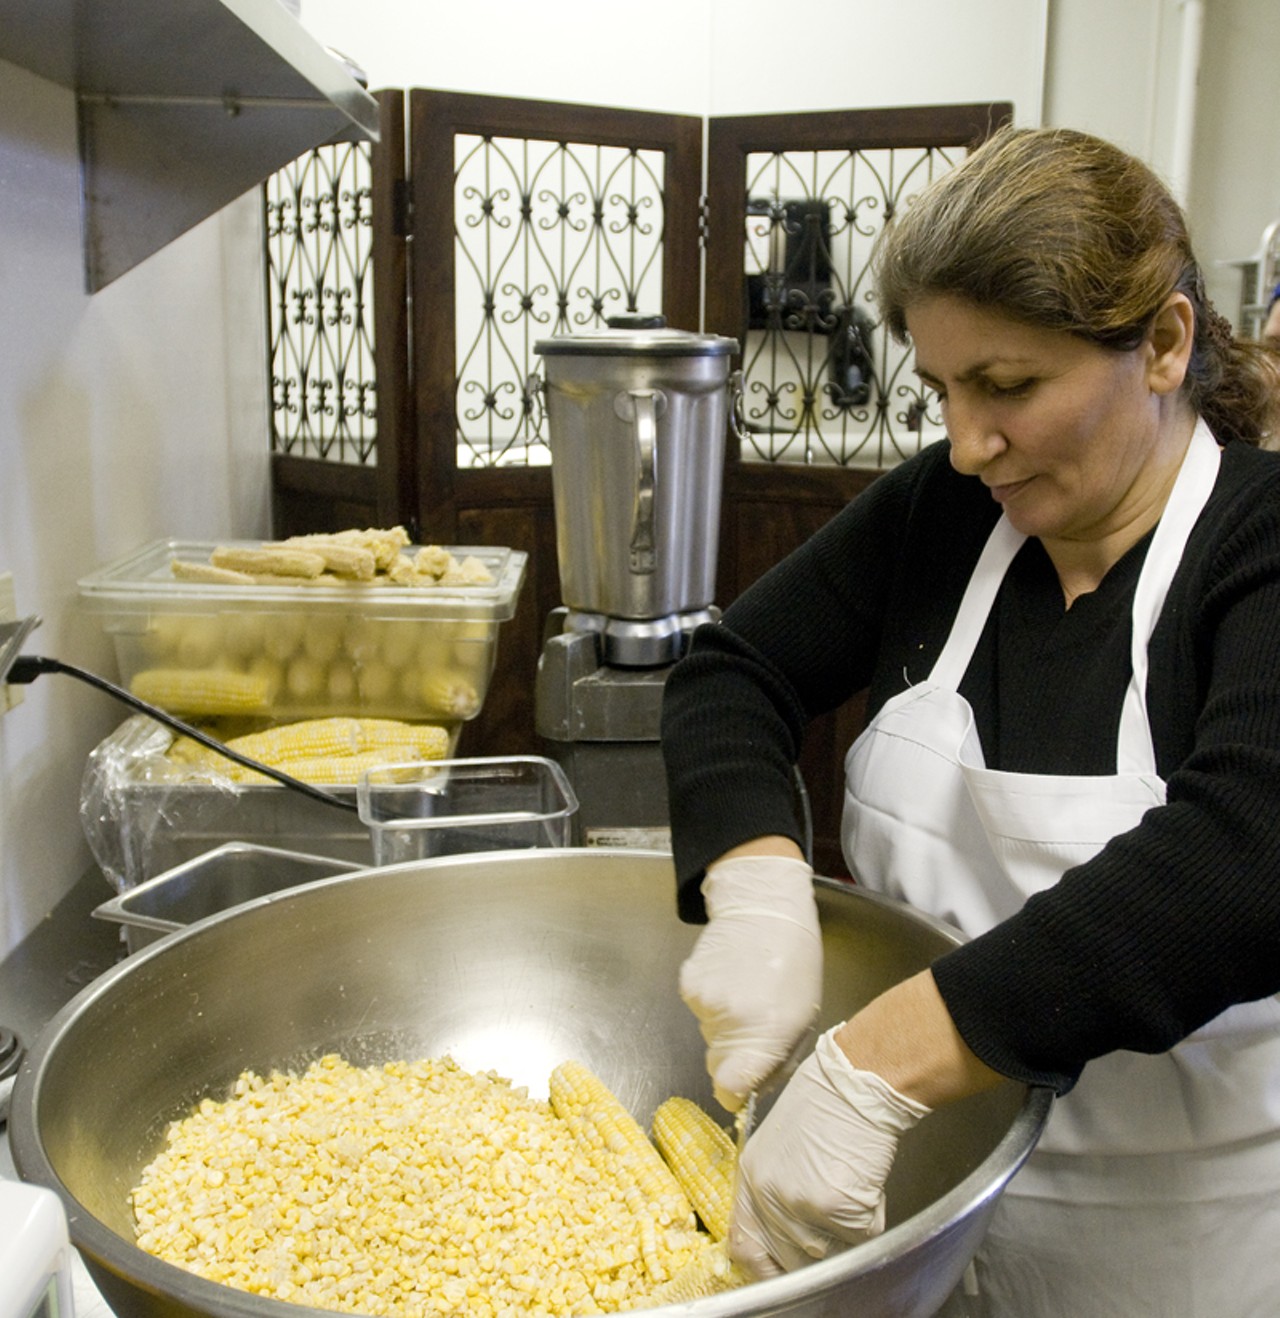 Nazira Shakhbazova has the task of cutting all the corn off the cobs.